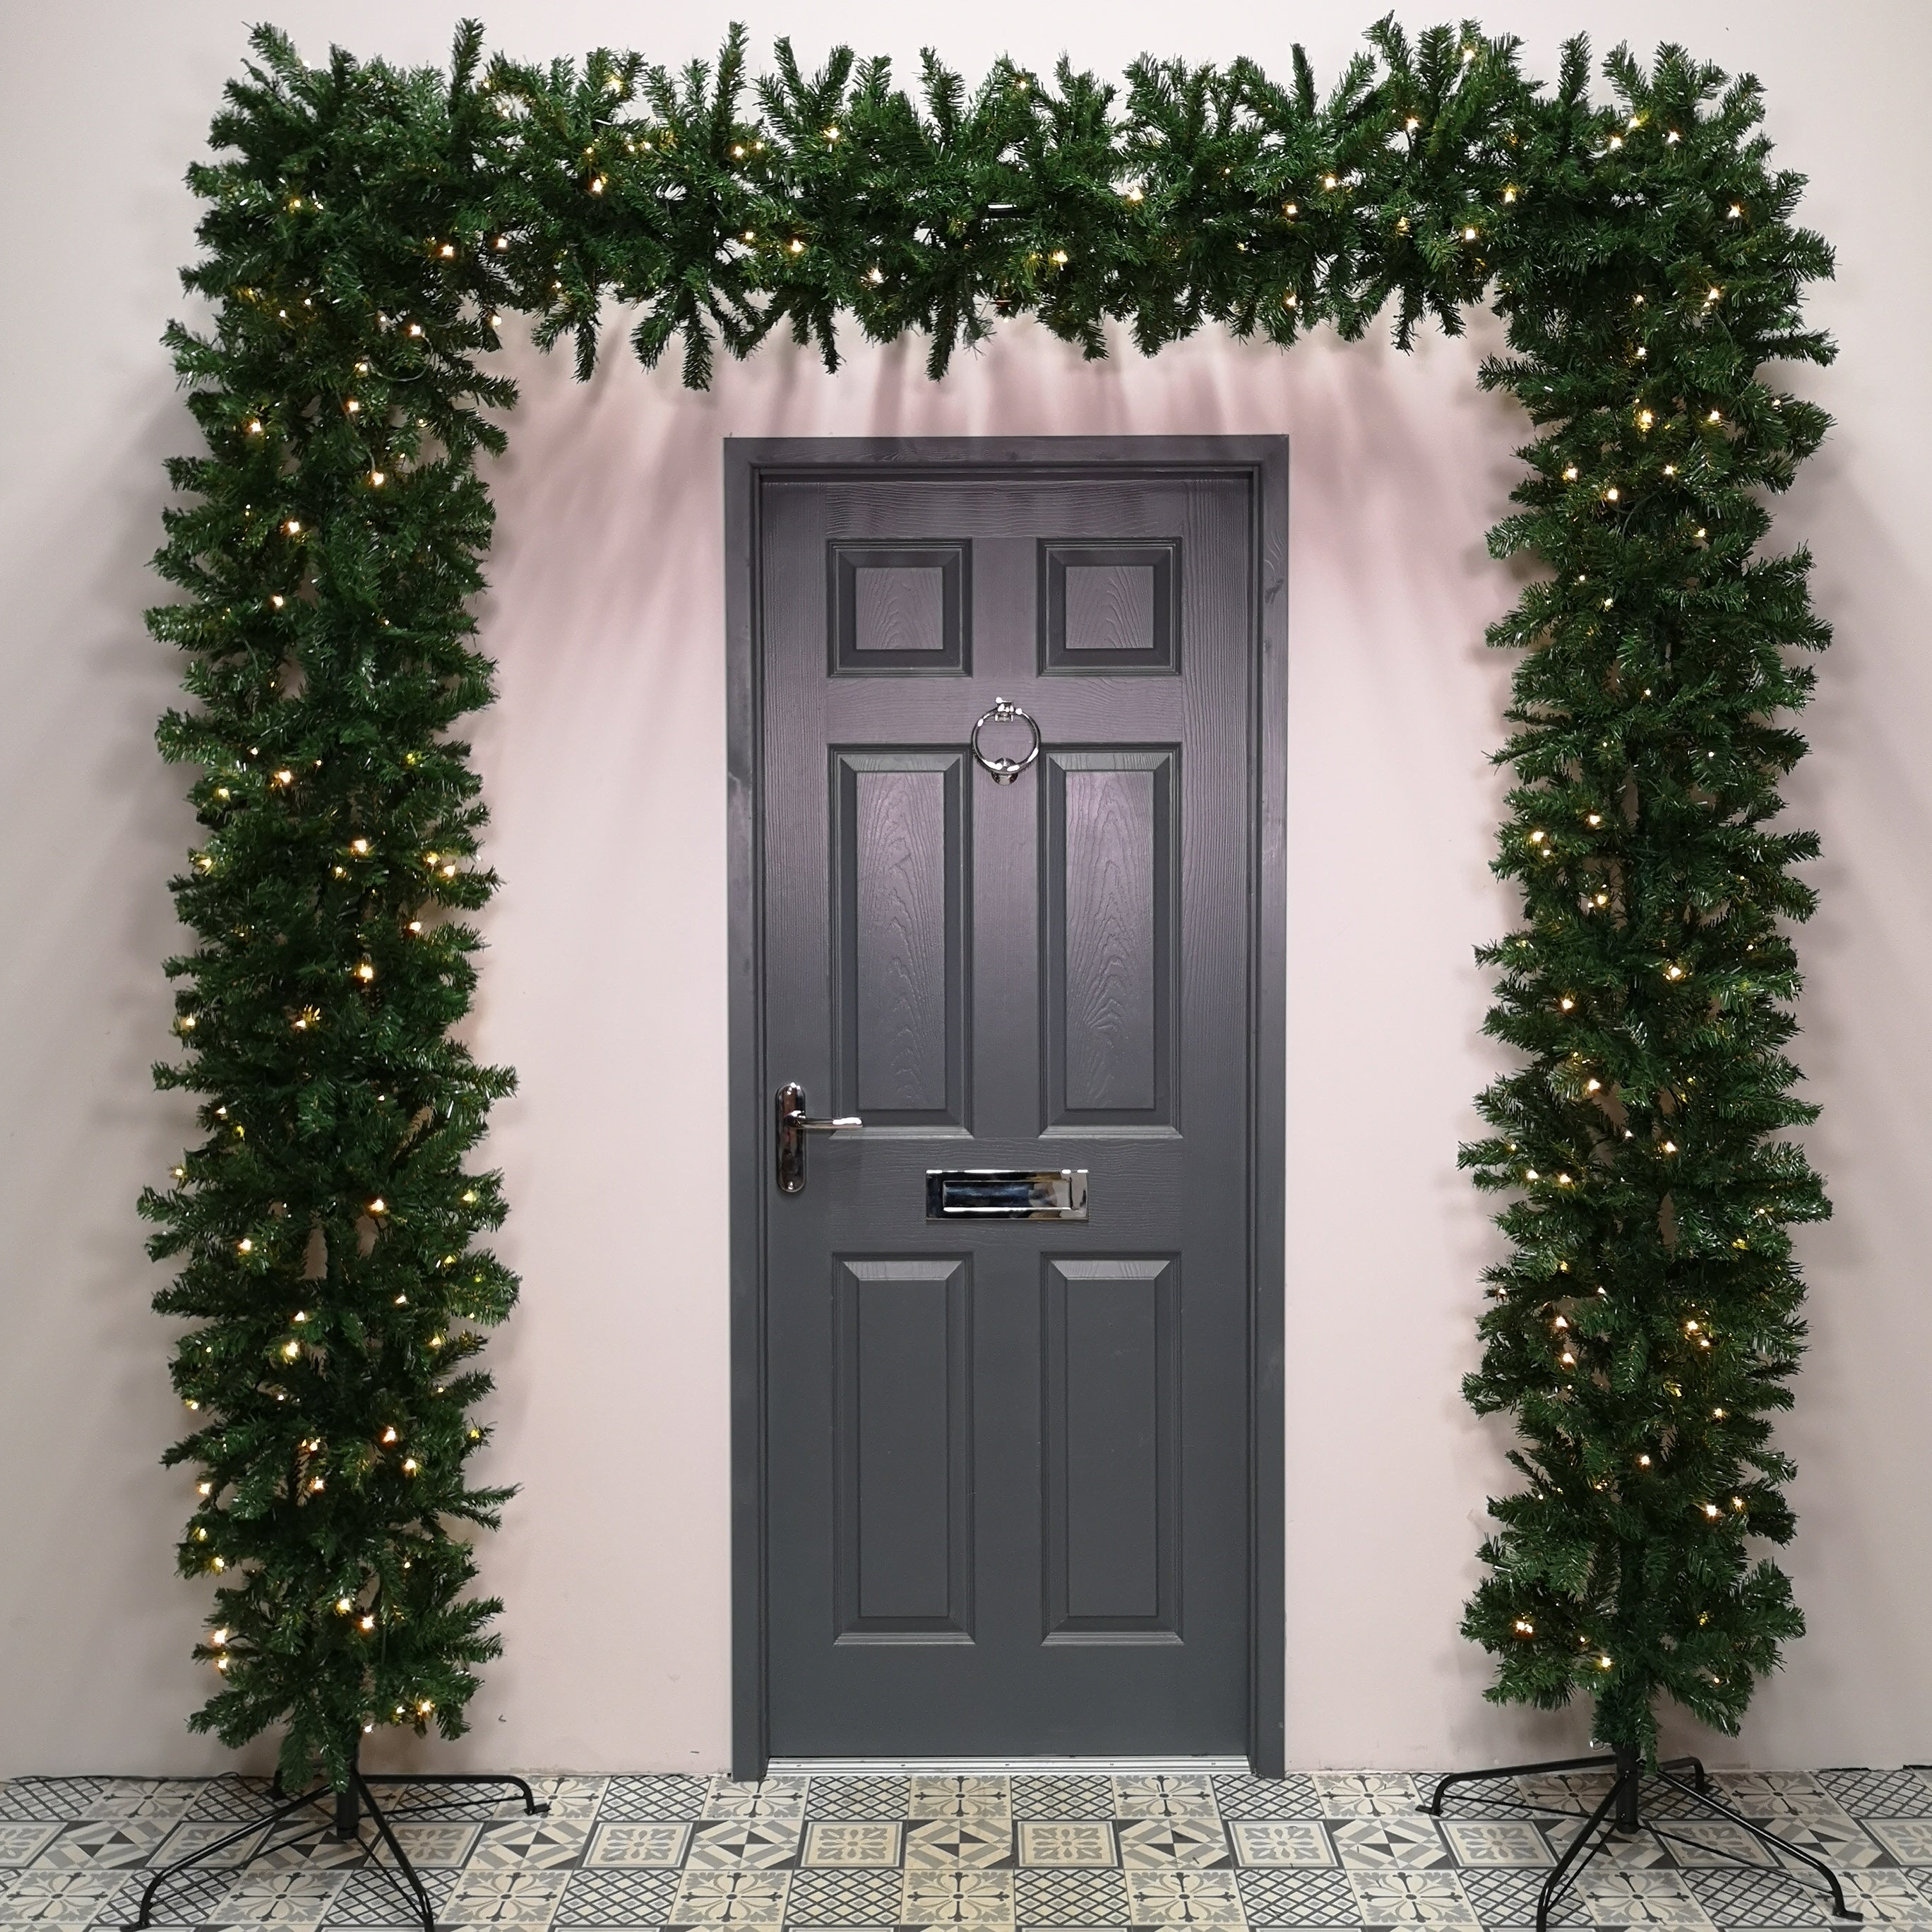 8ft (2.4m) Tall Prelit Premier Indoor / Outdoor Christmas Tree Arch in Green